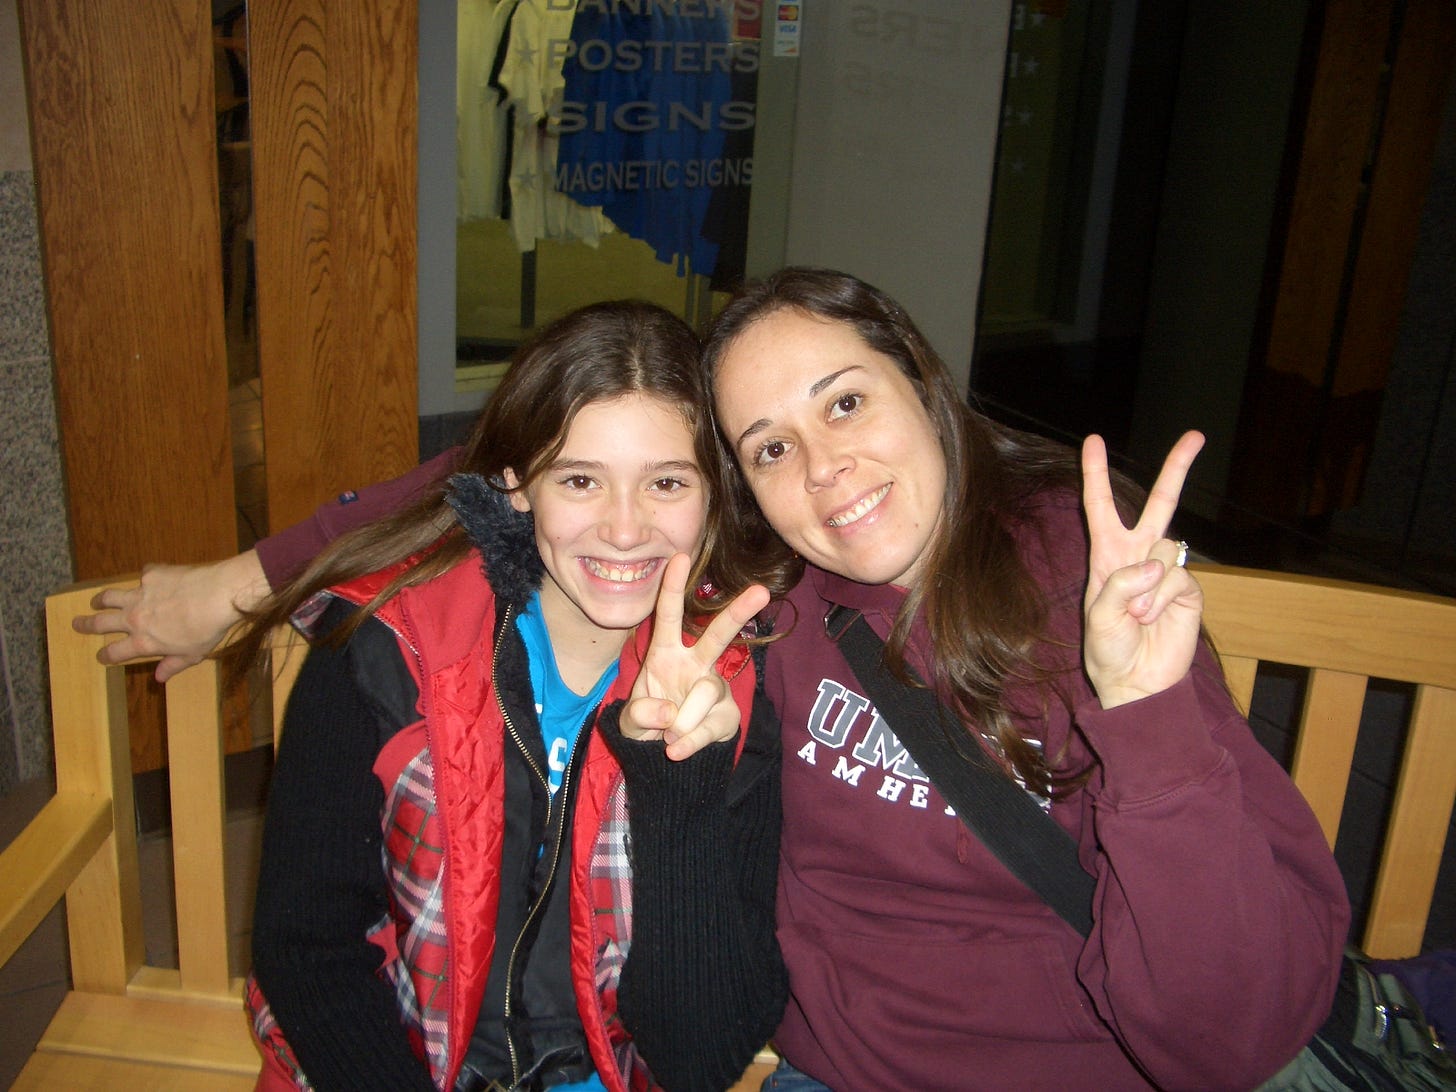 Two people sitting on a bench showing the Peace sign with thier hands. One is wearing a burgundy sweatshirt with UMASS Amherst written on the front. 